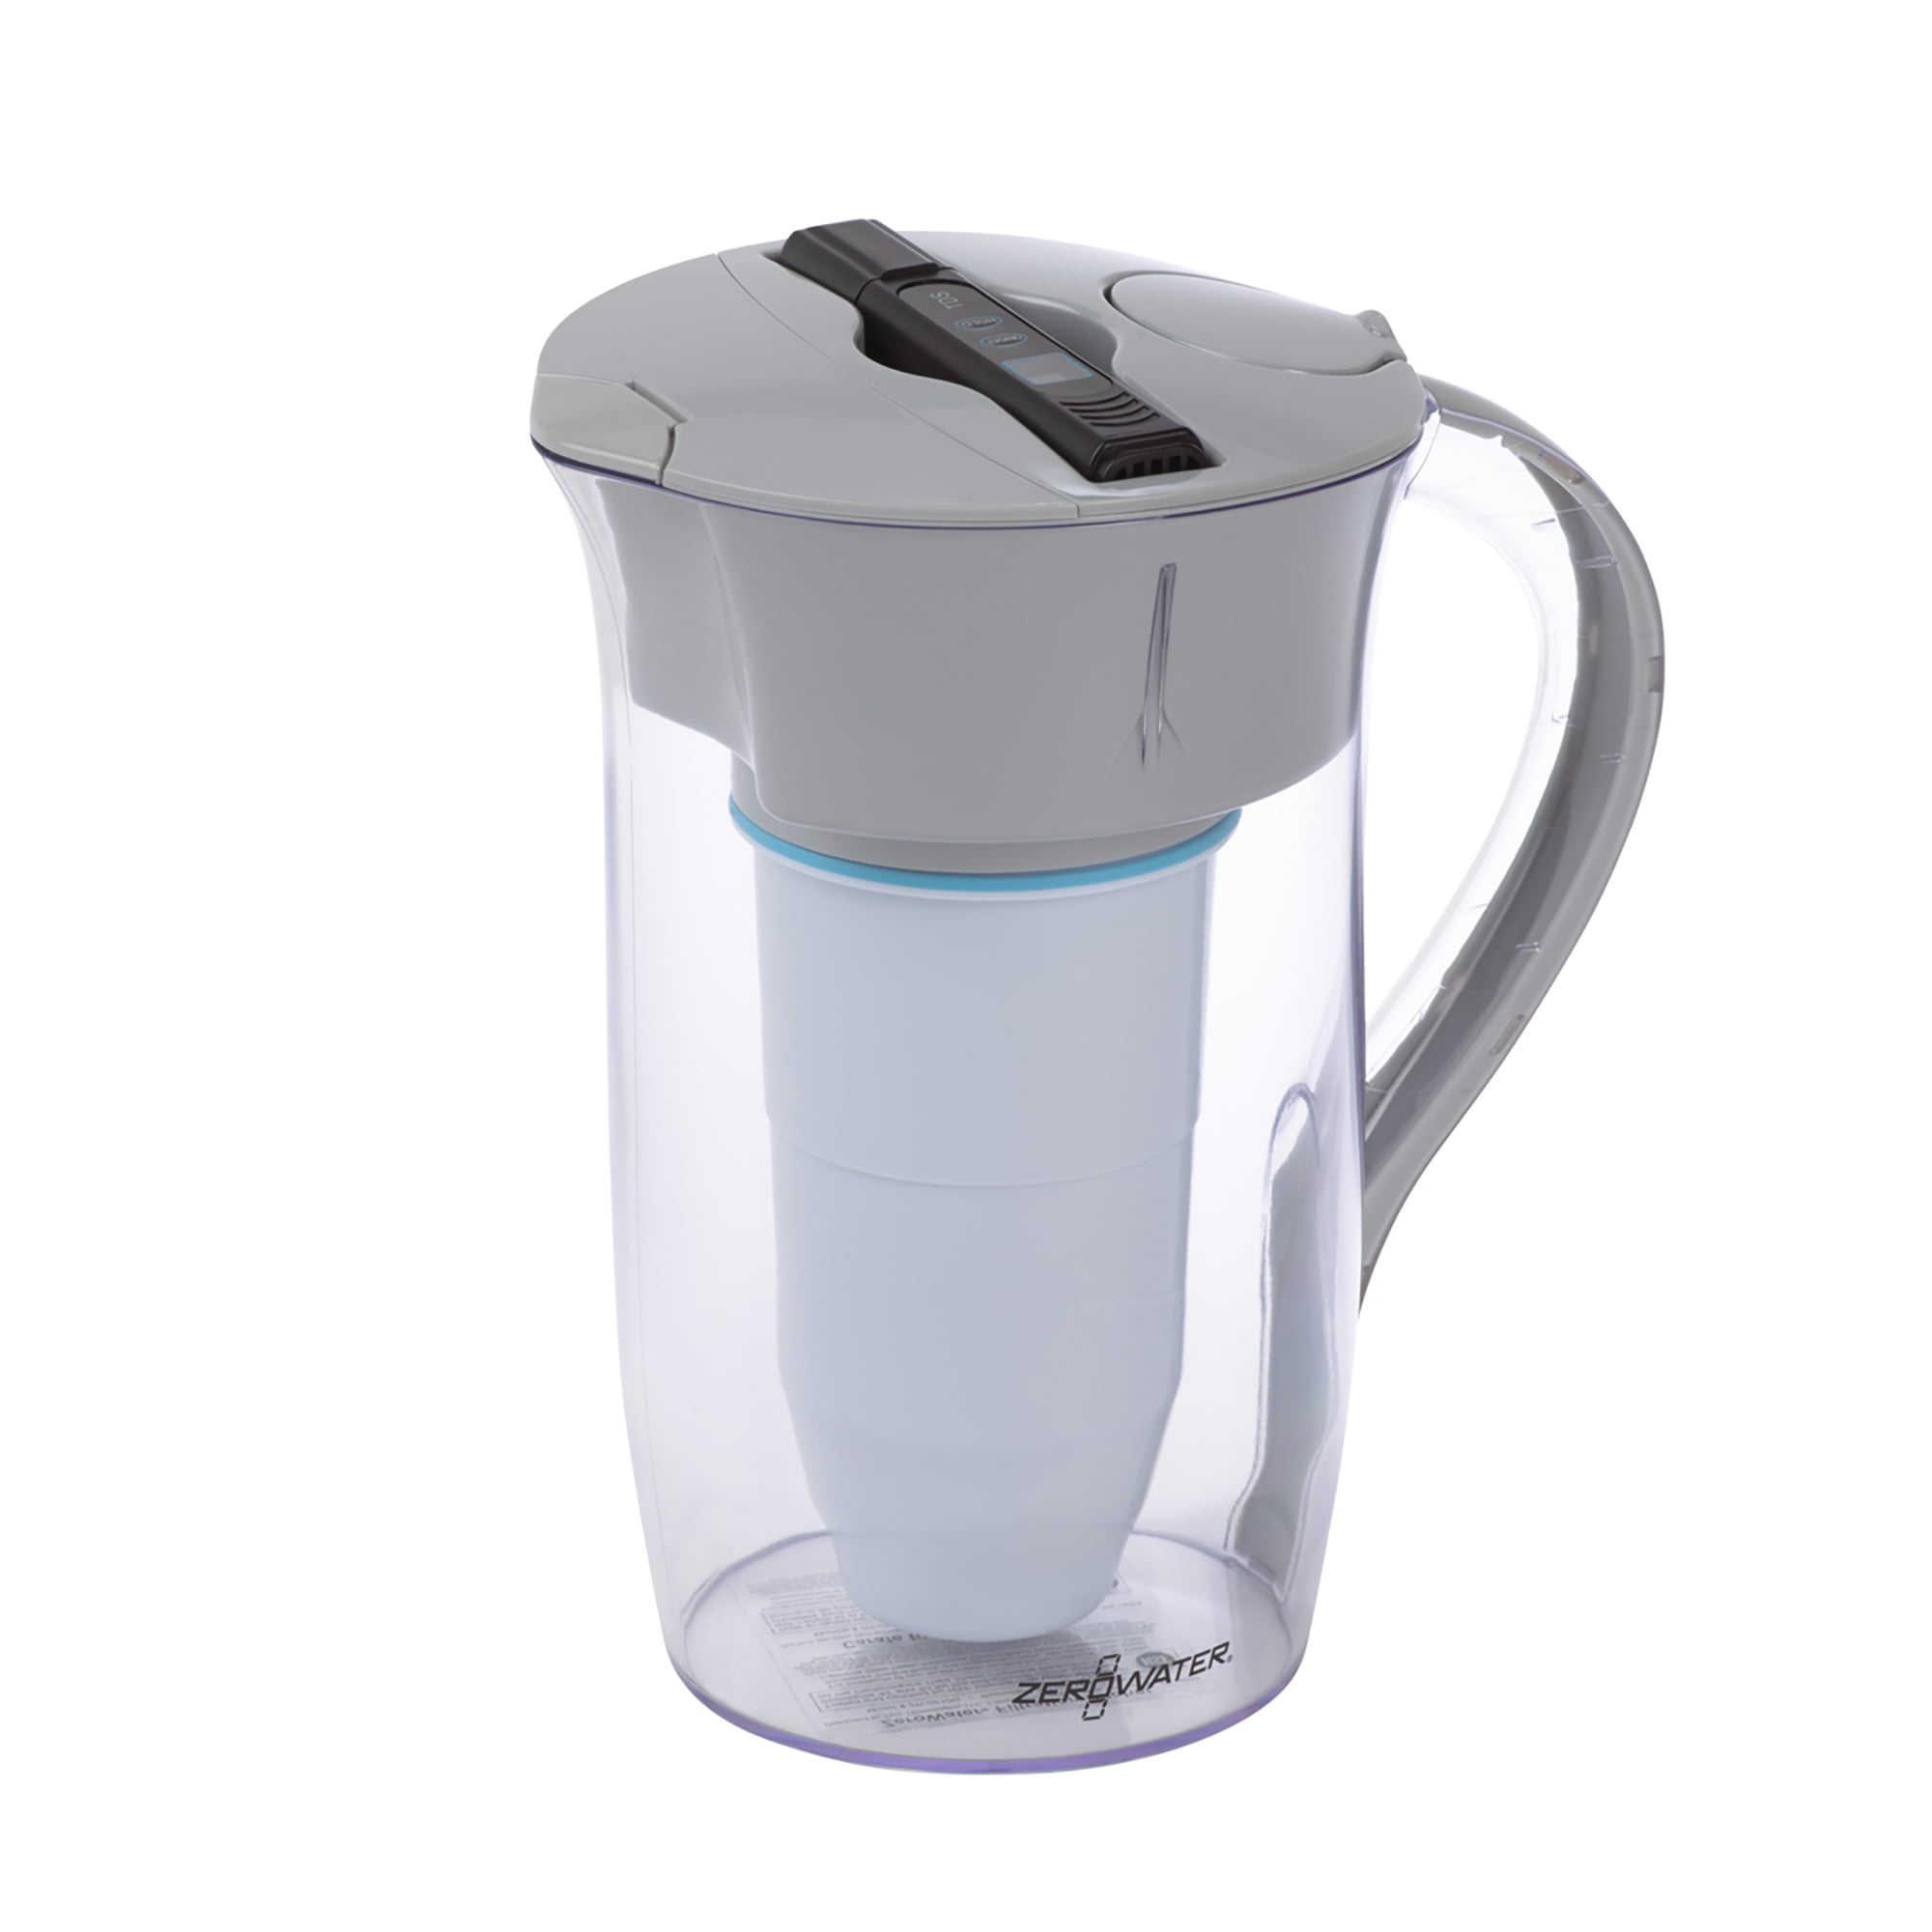 White Small Water Filter Pitcher Membrane Solutions 5 Cup Mini Size Jug Fast Filter and Pour for Fridge NSF Certified